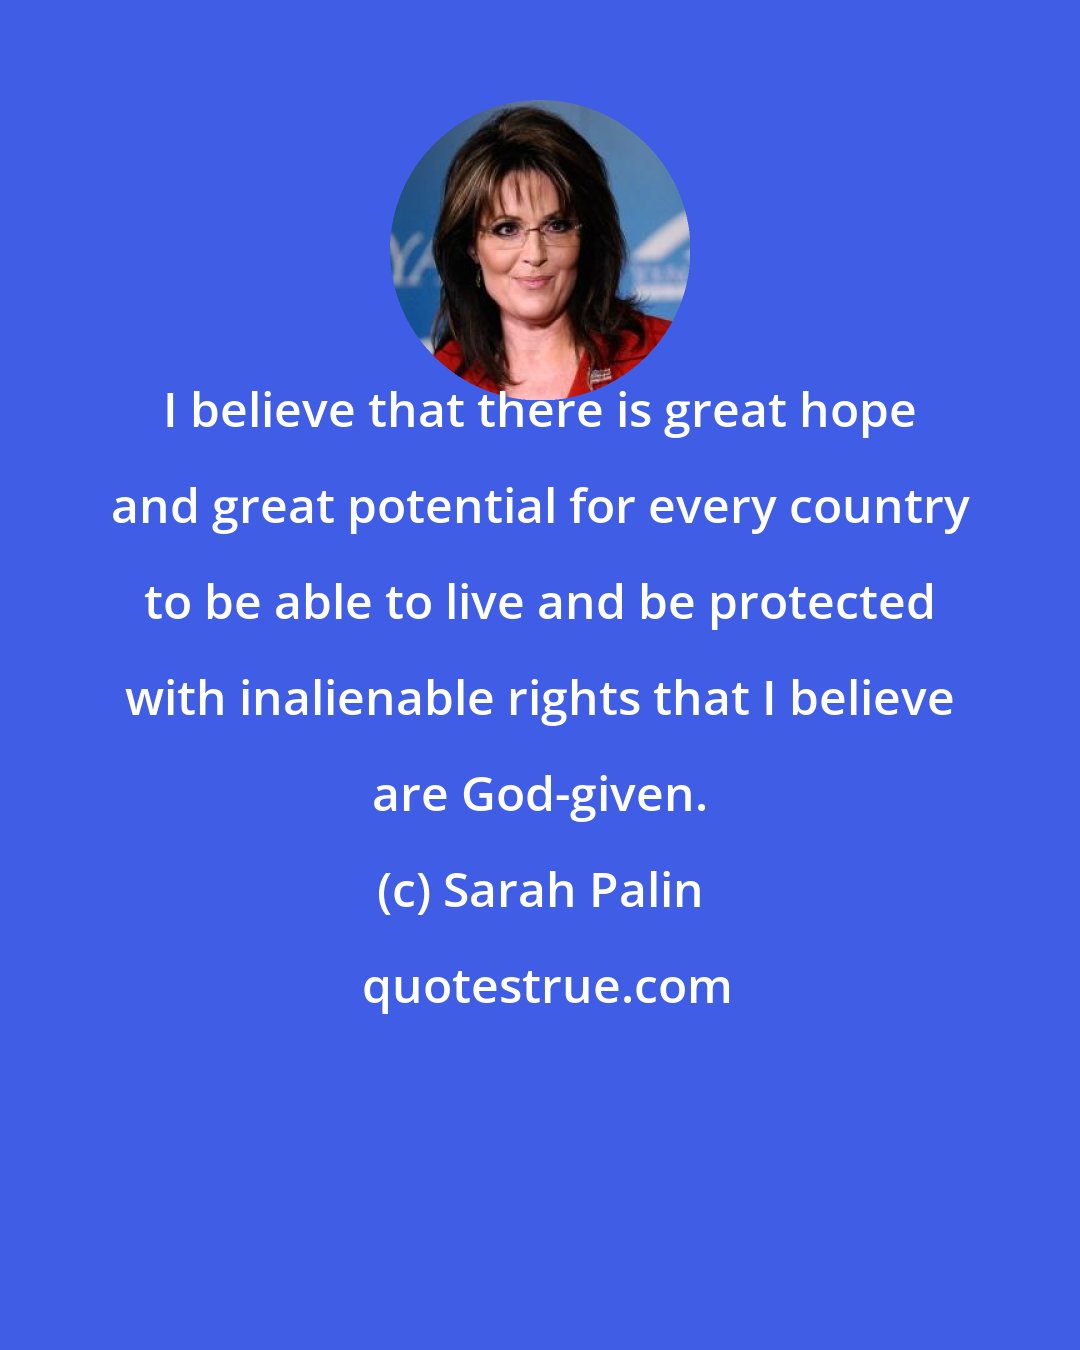 Sarah Palin: I believe that there is great hope and great potential for every country to be able to live and be protected with inalienable rights that I believe are God-given.